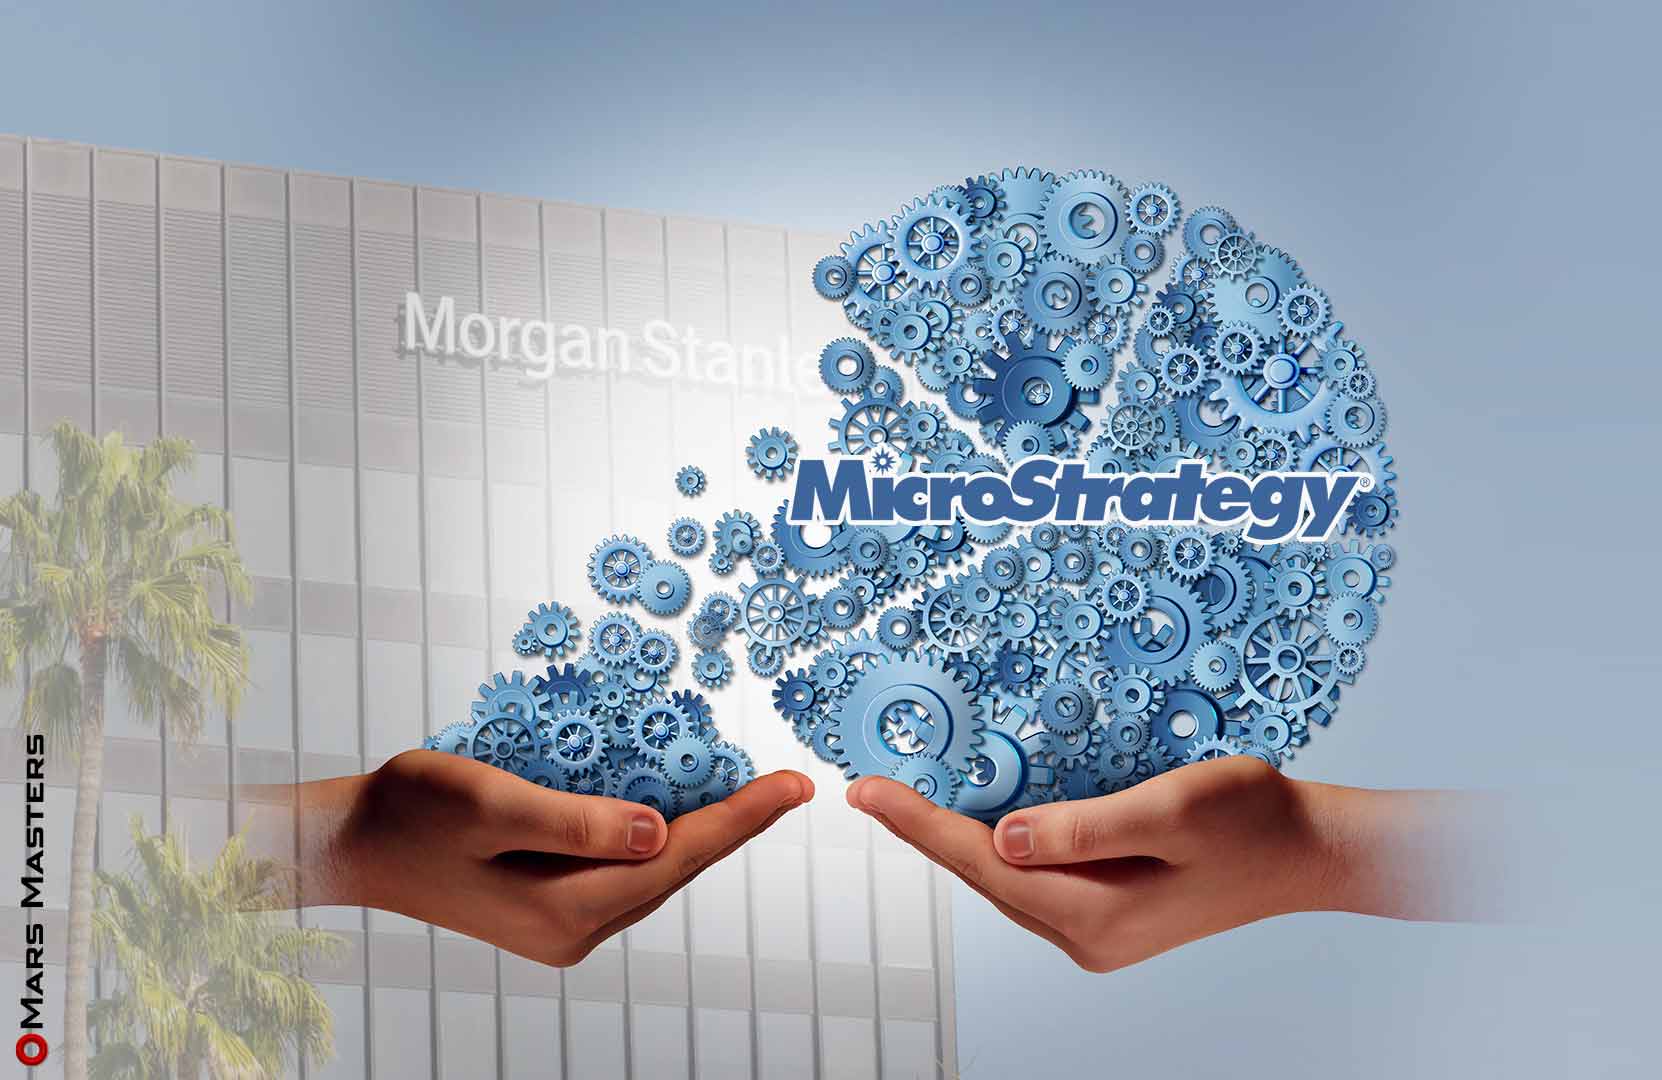 Morgan Stanley holds a 10% stake in MicroStrategy